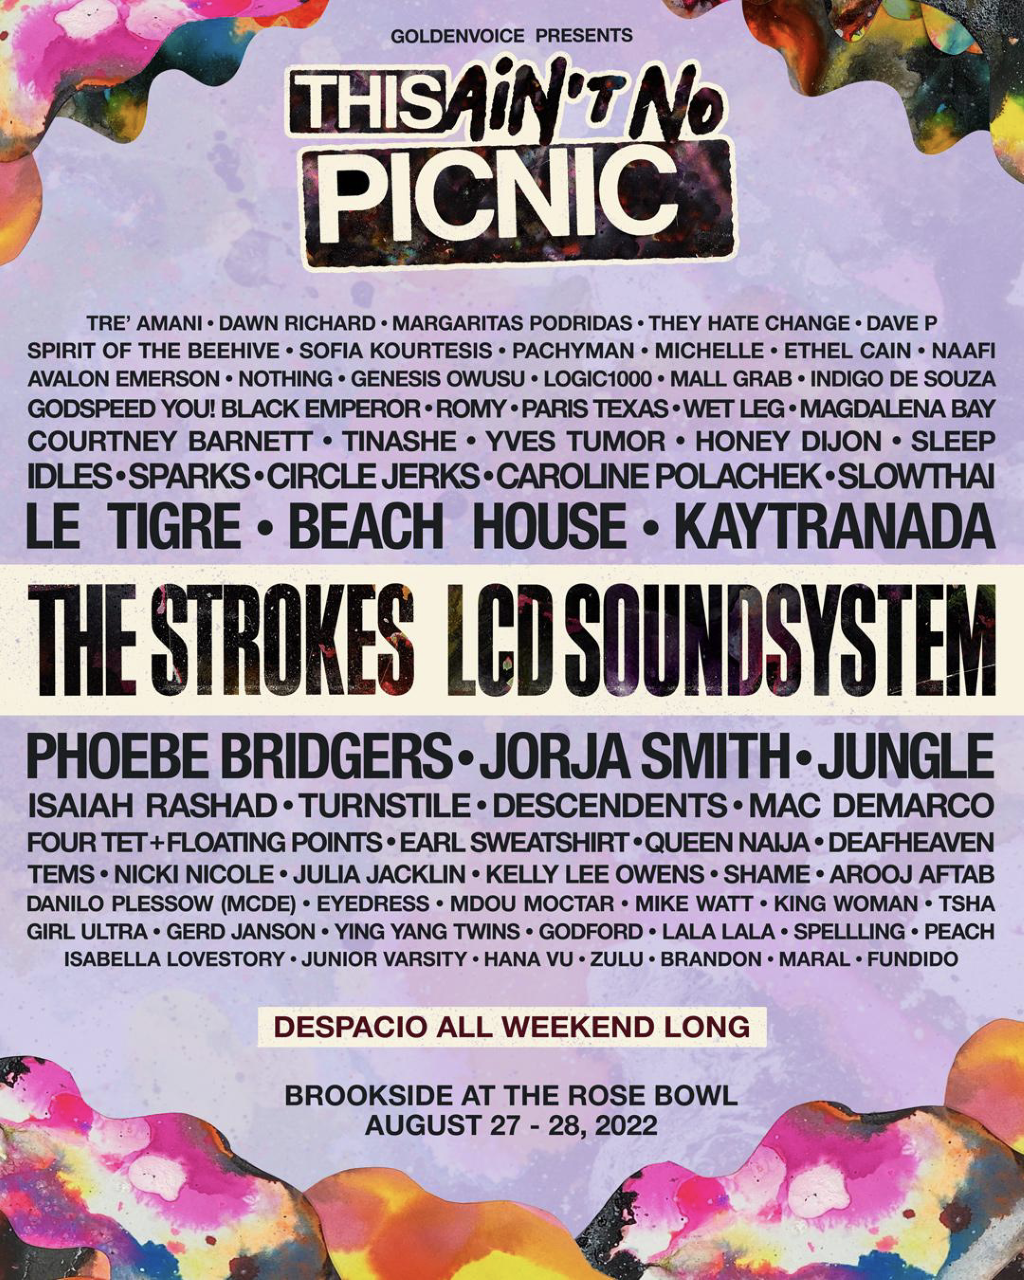 This Ain't No Picnic Lineup Poster features a purple background, with tie-dye accents in each corner. 